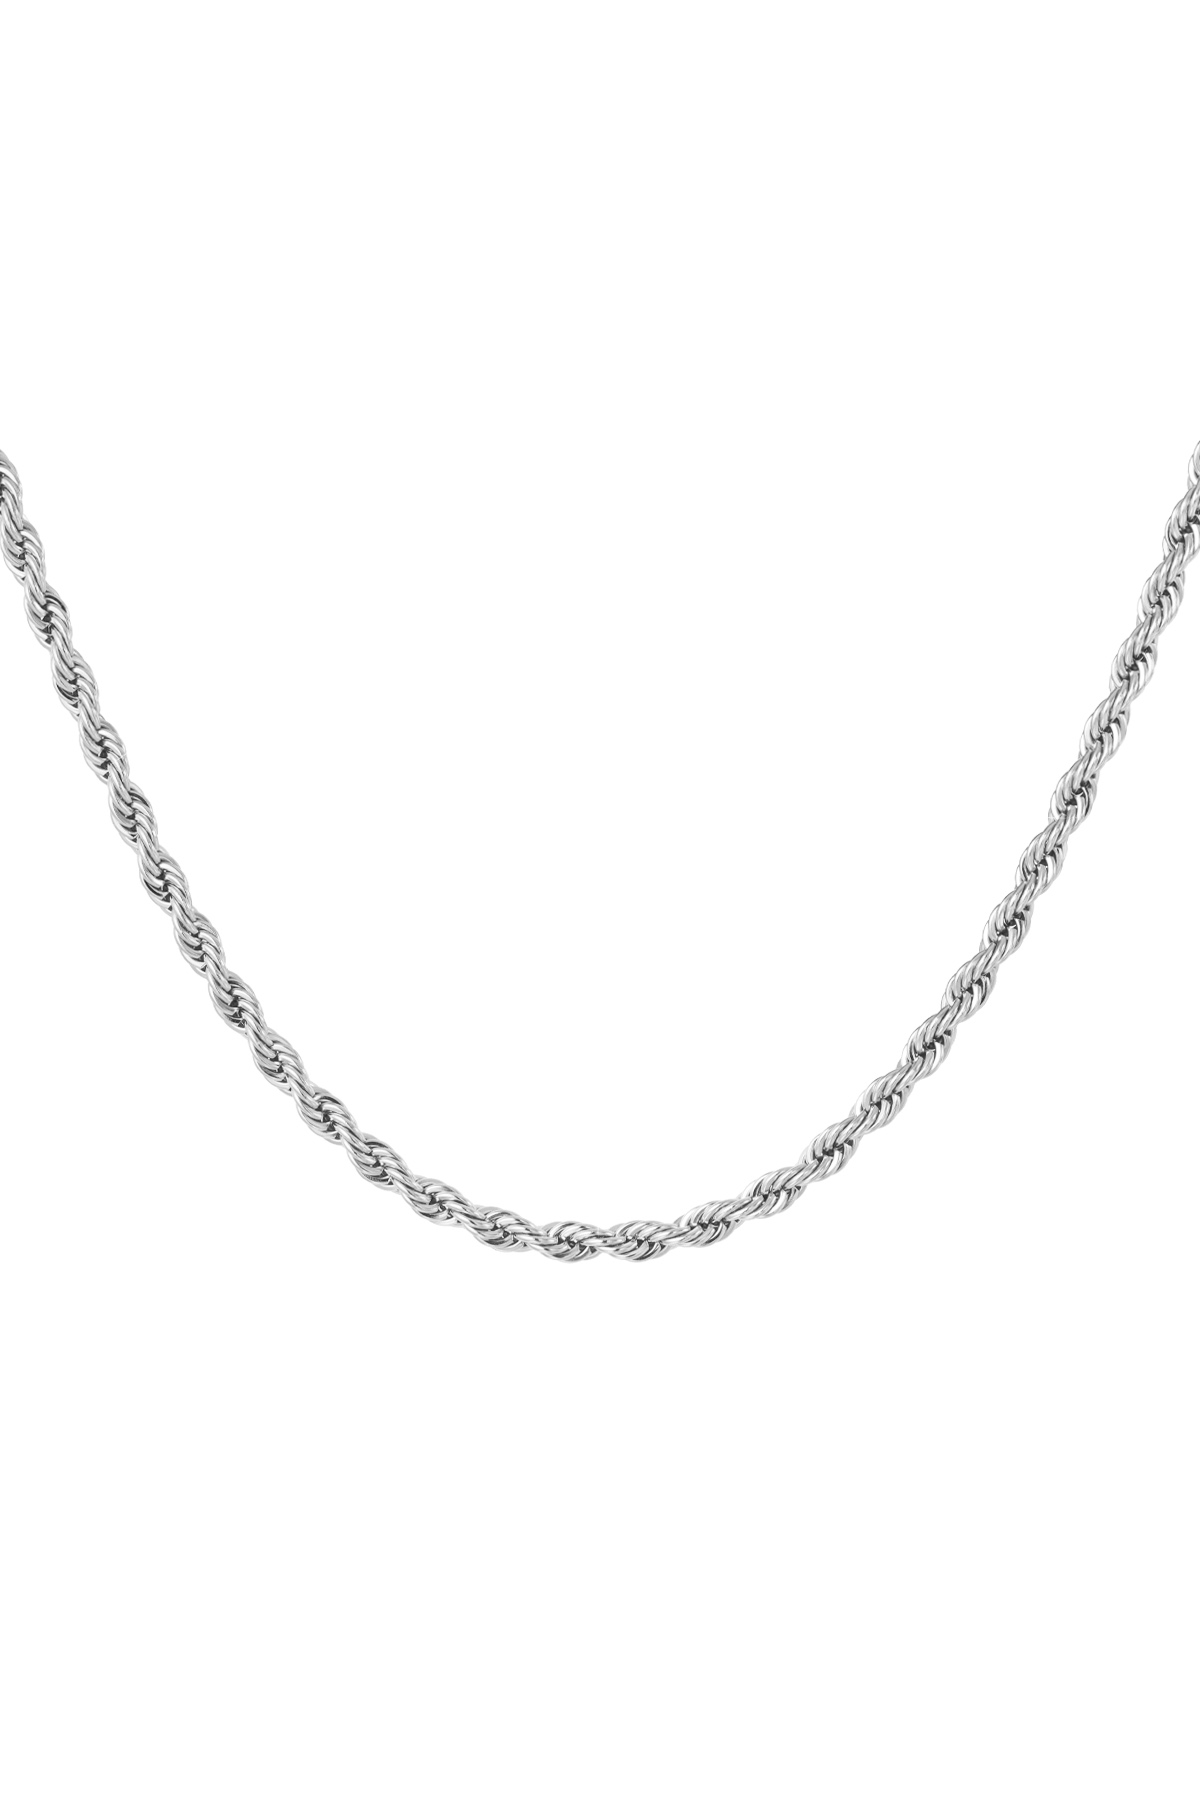 Unisex necklace twisted 50cm - silver-4.0MM h5 